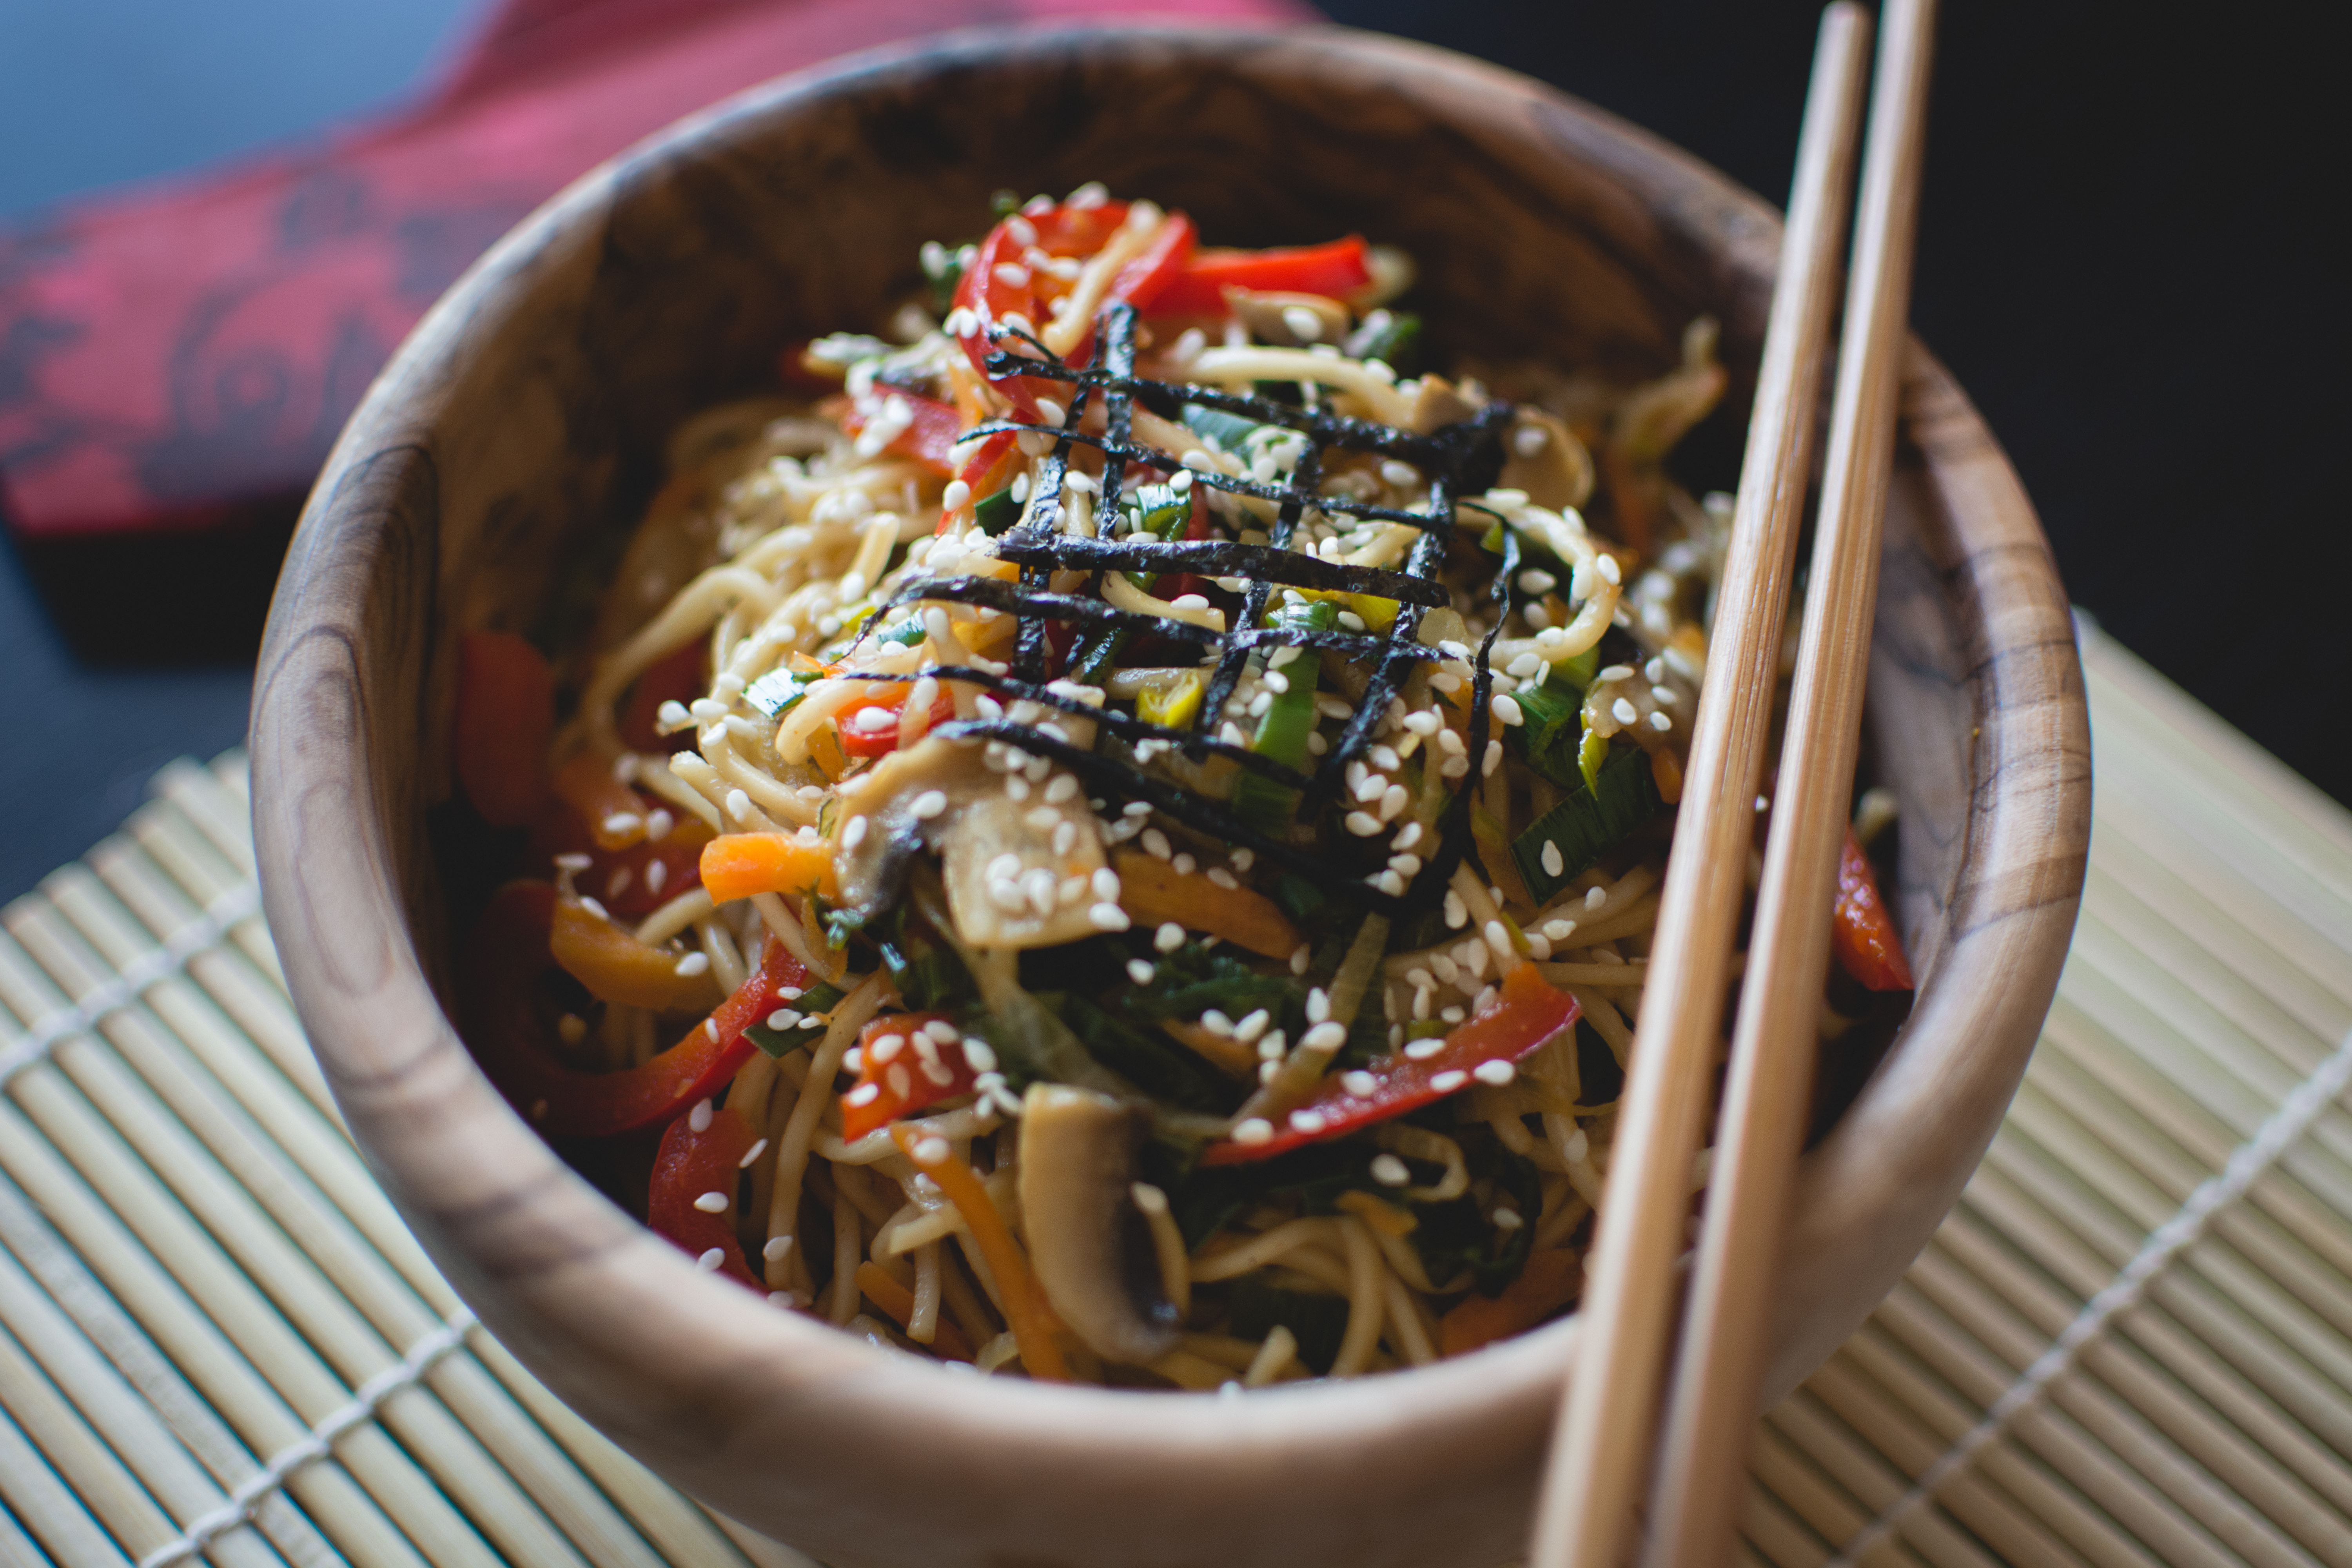 Noodles with vegetables in a wooden bowl with wooden chopsticks